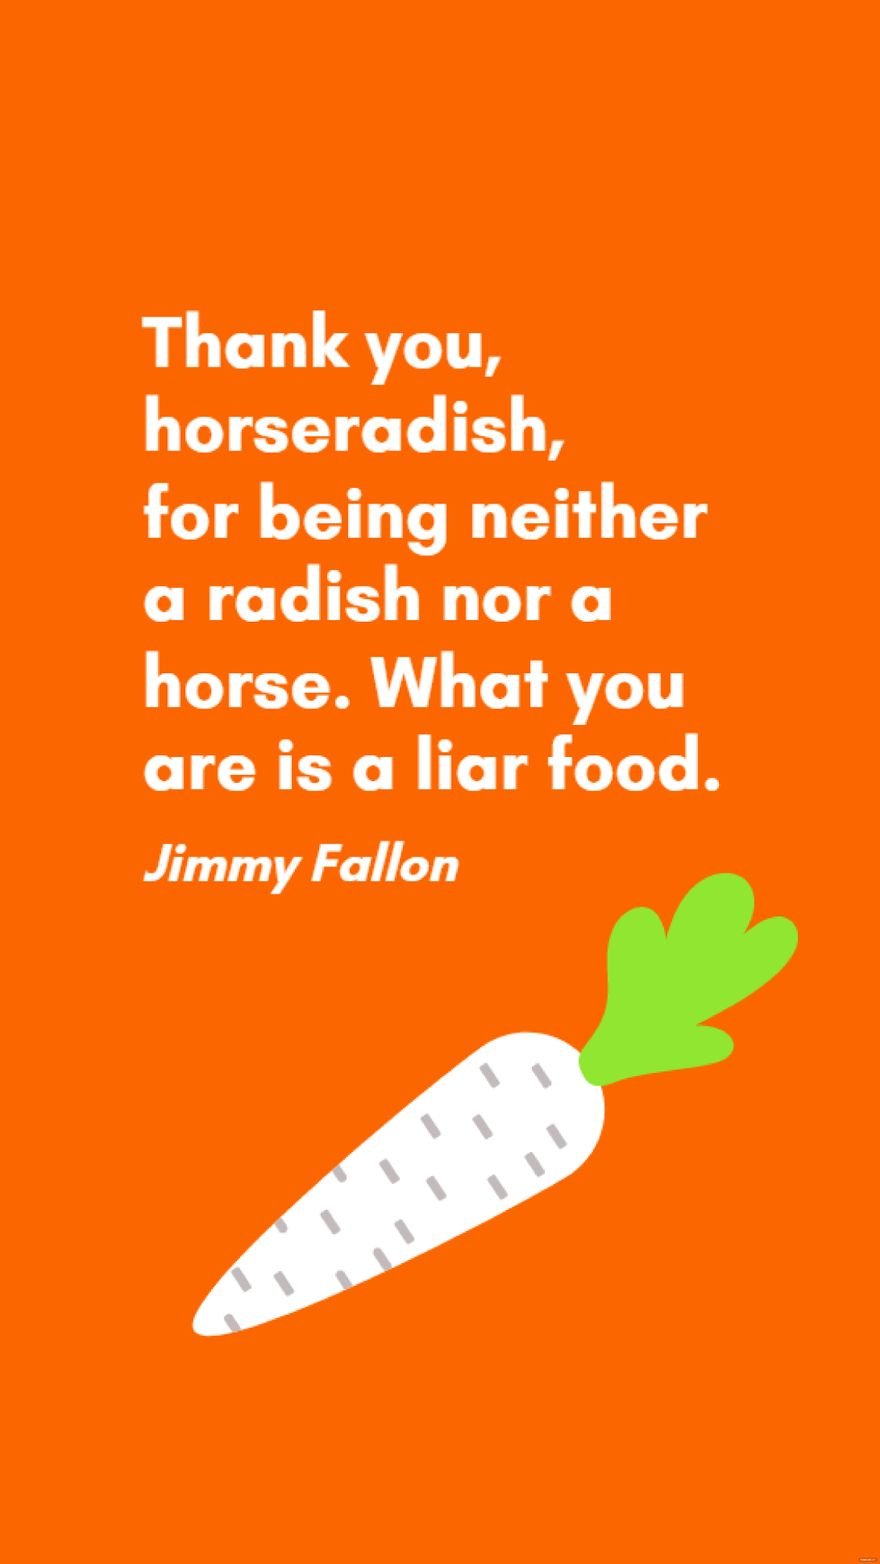 Jimmy Fallon - Thank you, horseradish, for being neither a radish nor a horse. What you are is a liar food.